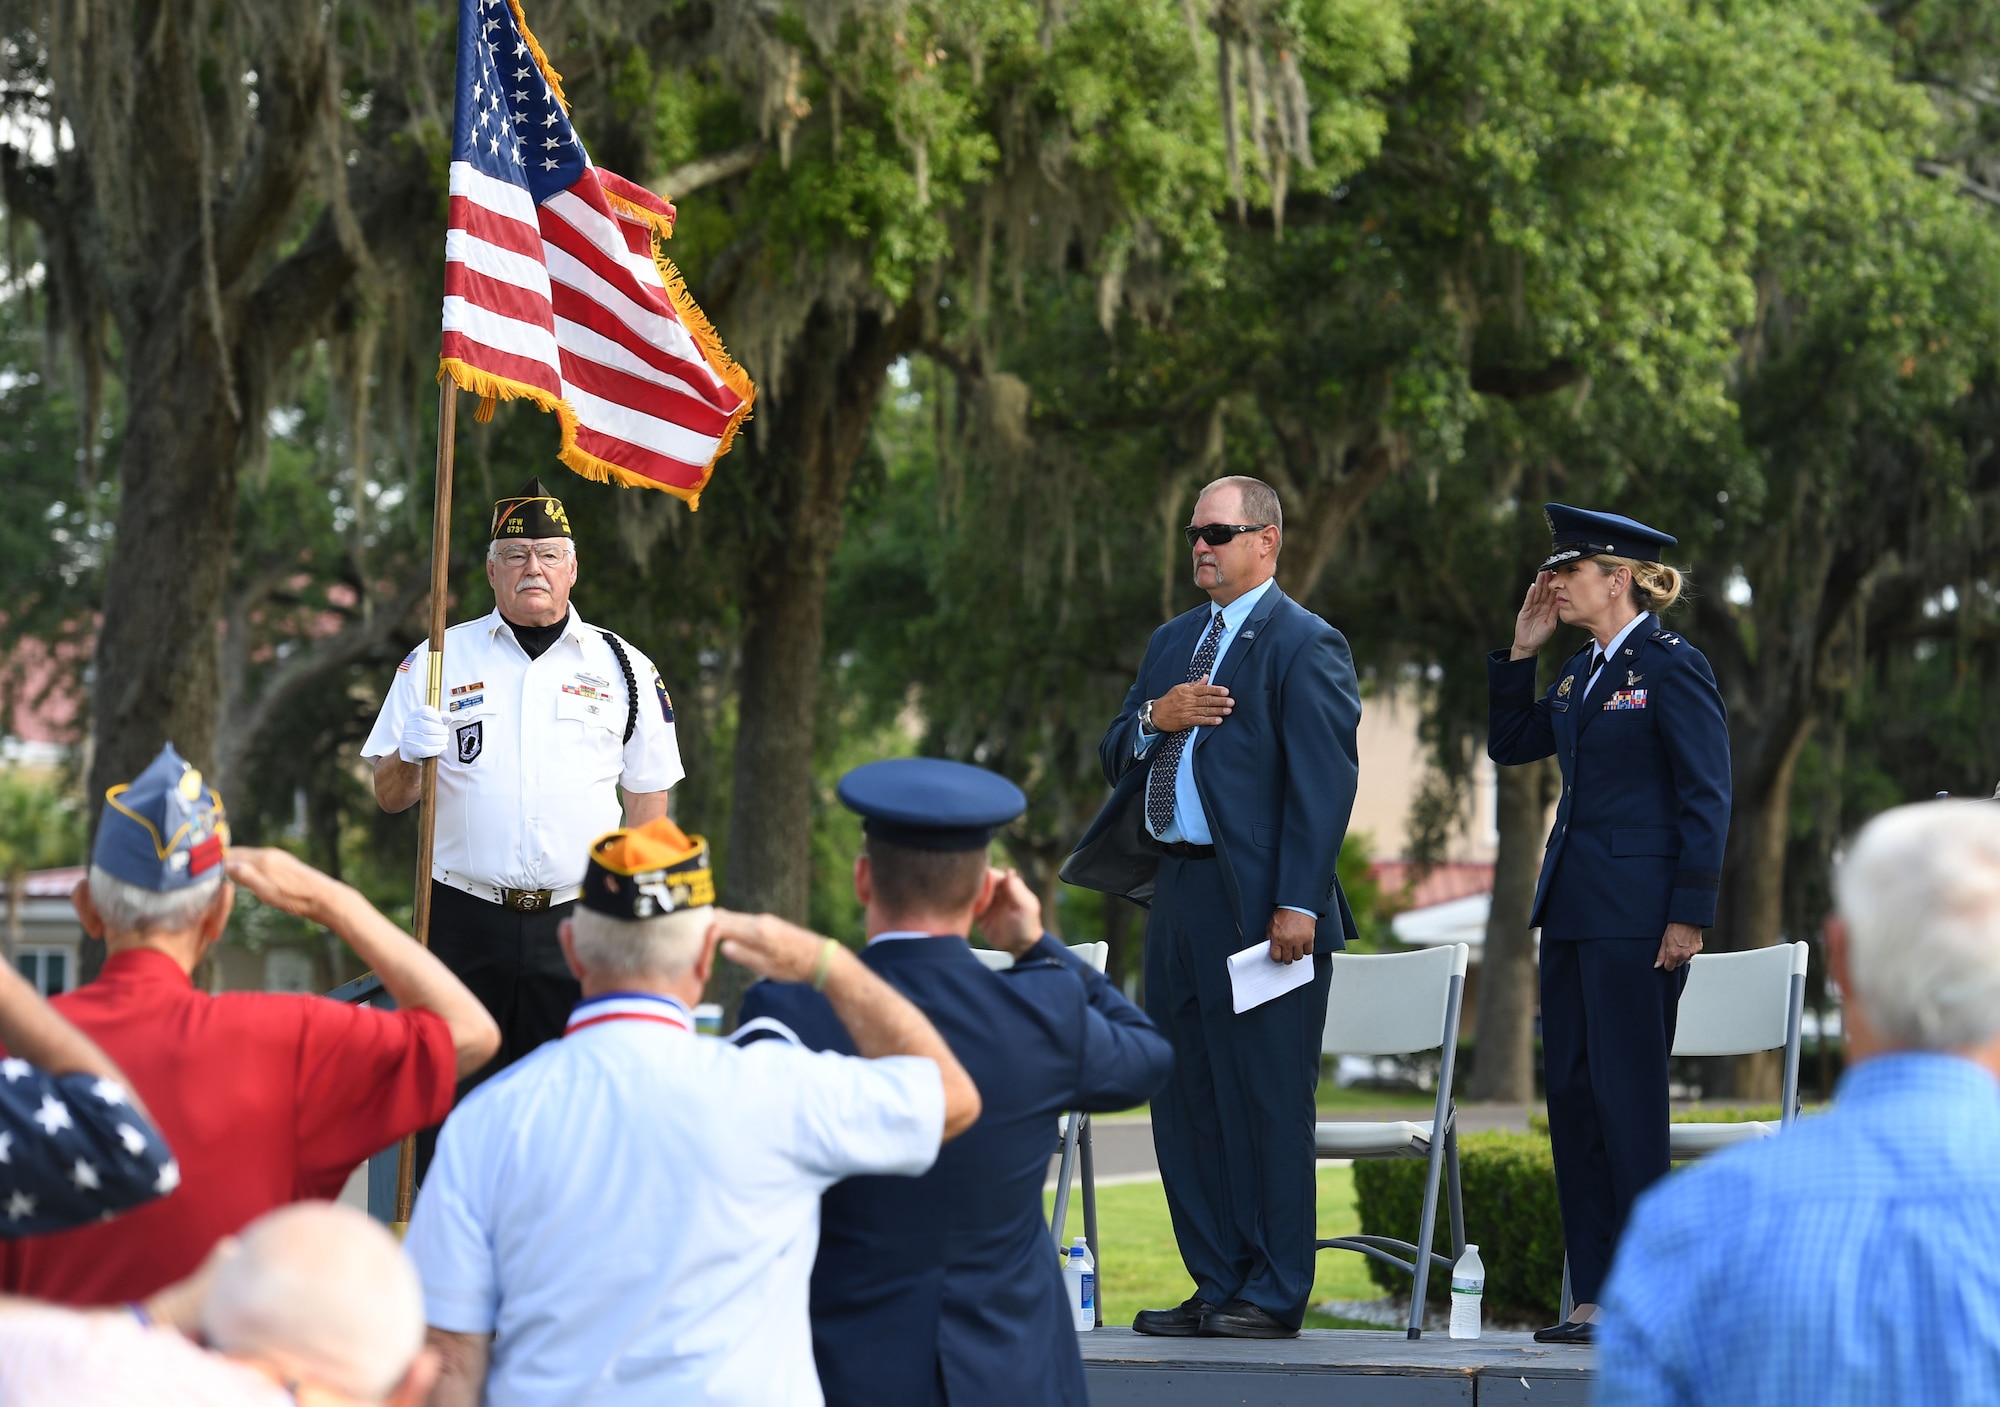 U.S. Air Force Maj. Gen. Michele Edmondson, Second Air Force commander, participates in the Biloxi National Cemetery Memorial Day Ceremony in Biloxi, Mississippi, May 30, 2022. The ceremony honored those who have made the ultimate sacrifice while serving in the armed forces. Biloxi National Cemetery is the final resting place of more than 23,000 veterans and their family members. Every year, 800 burials take place there for men and women who served in wars years ago and for those defending America today. (U.S. Air Force photo by Kemberly Groue)